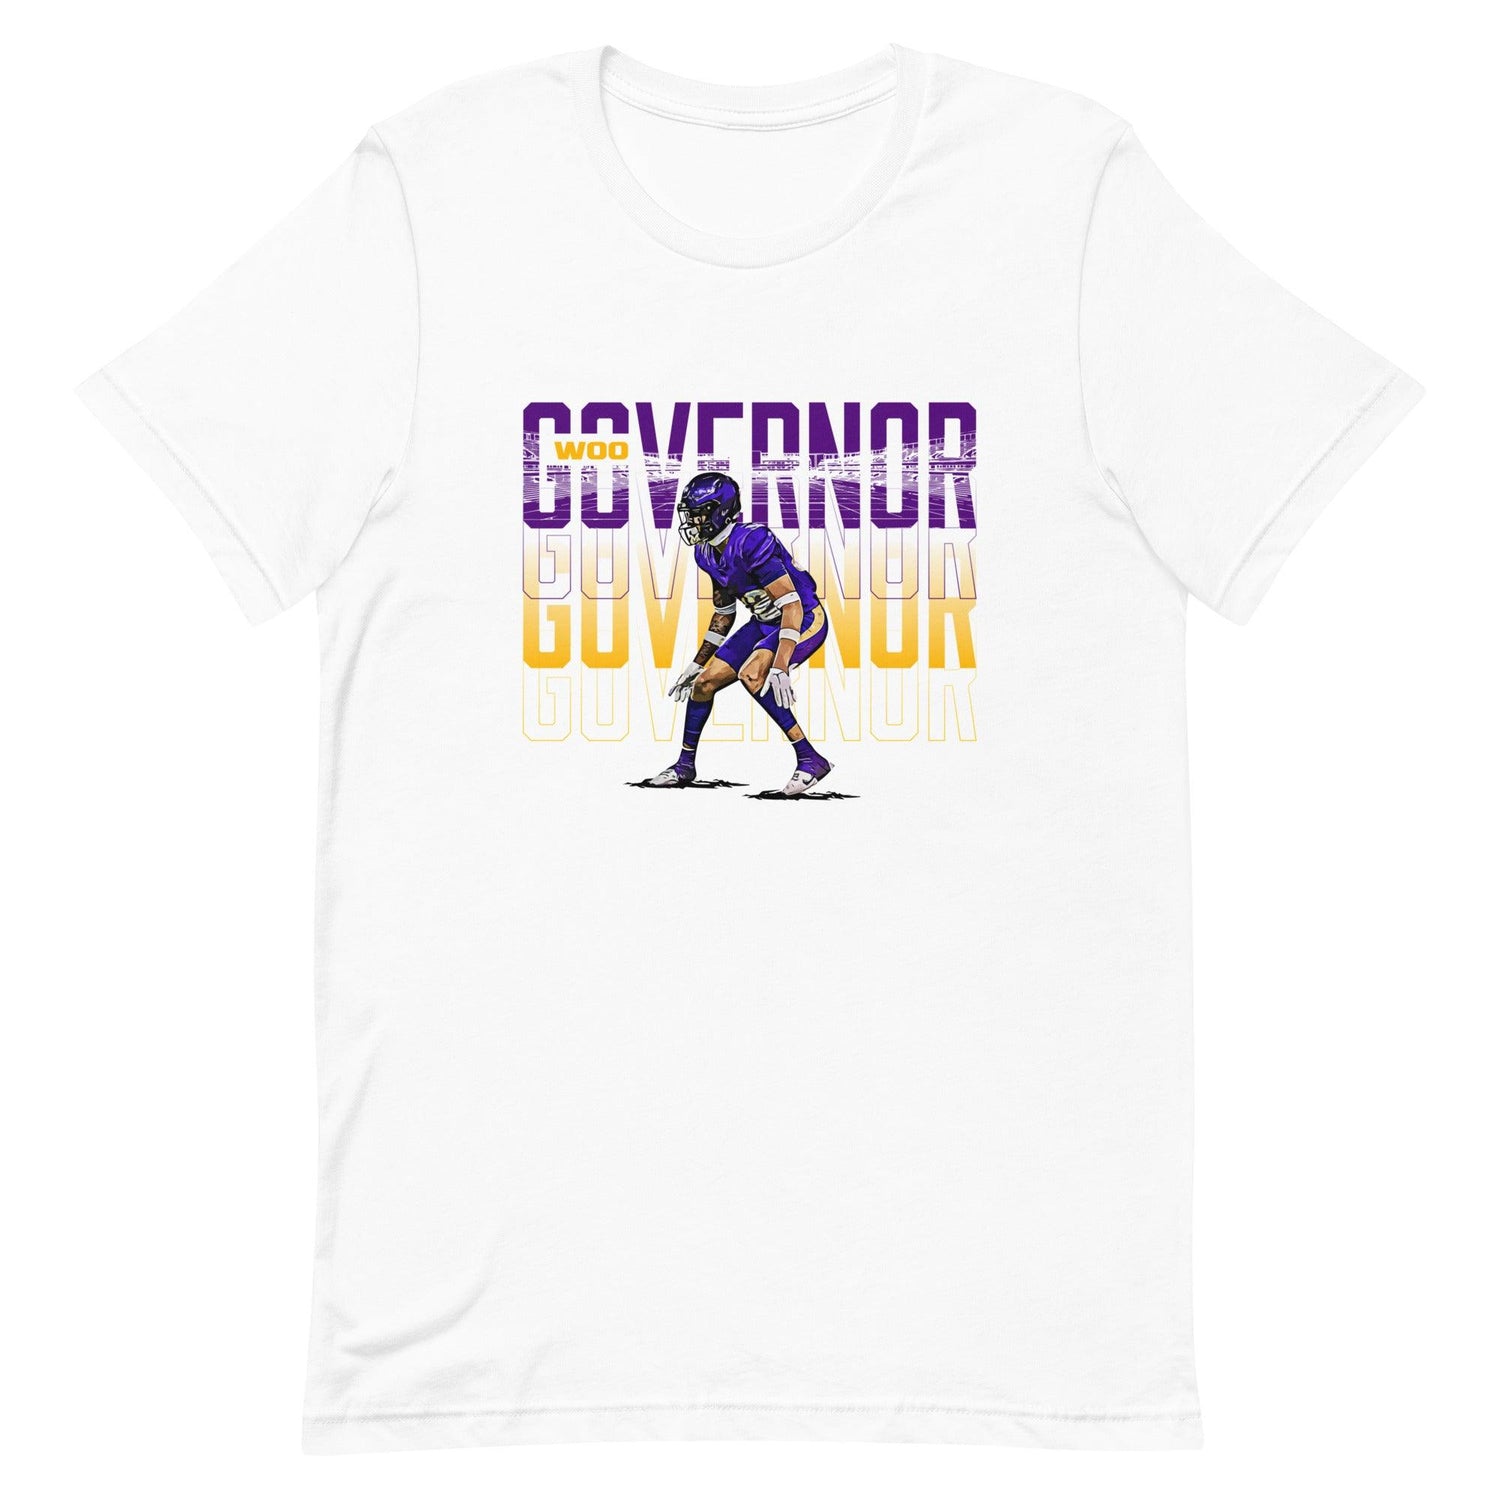 Woo Governor "Gameday" t-shirt - Fan Arch